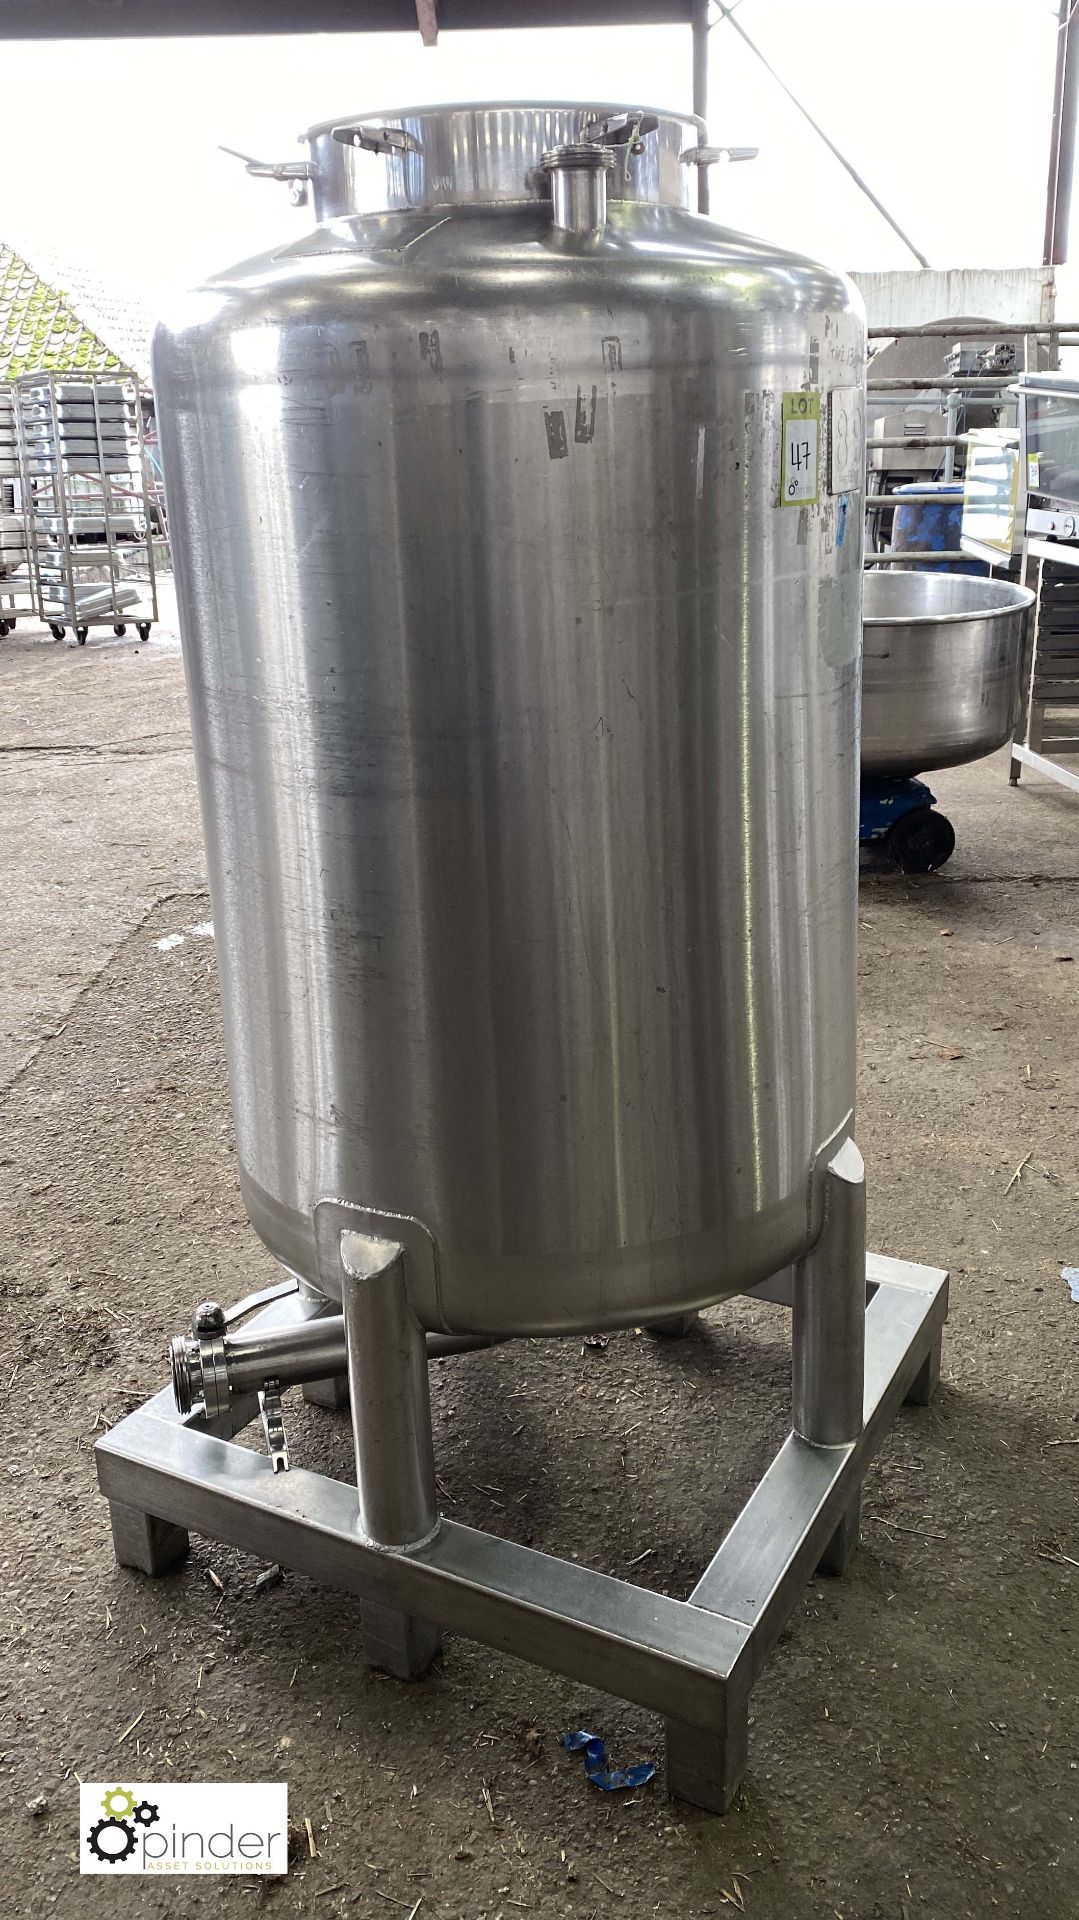 Wincanton stainless steel Tank, mounted on stainless steel frame, 138kg weight, serial number 3172-R - Image 2 of 6